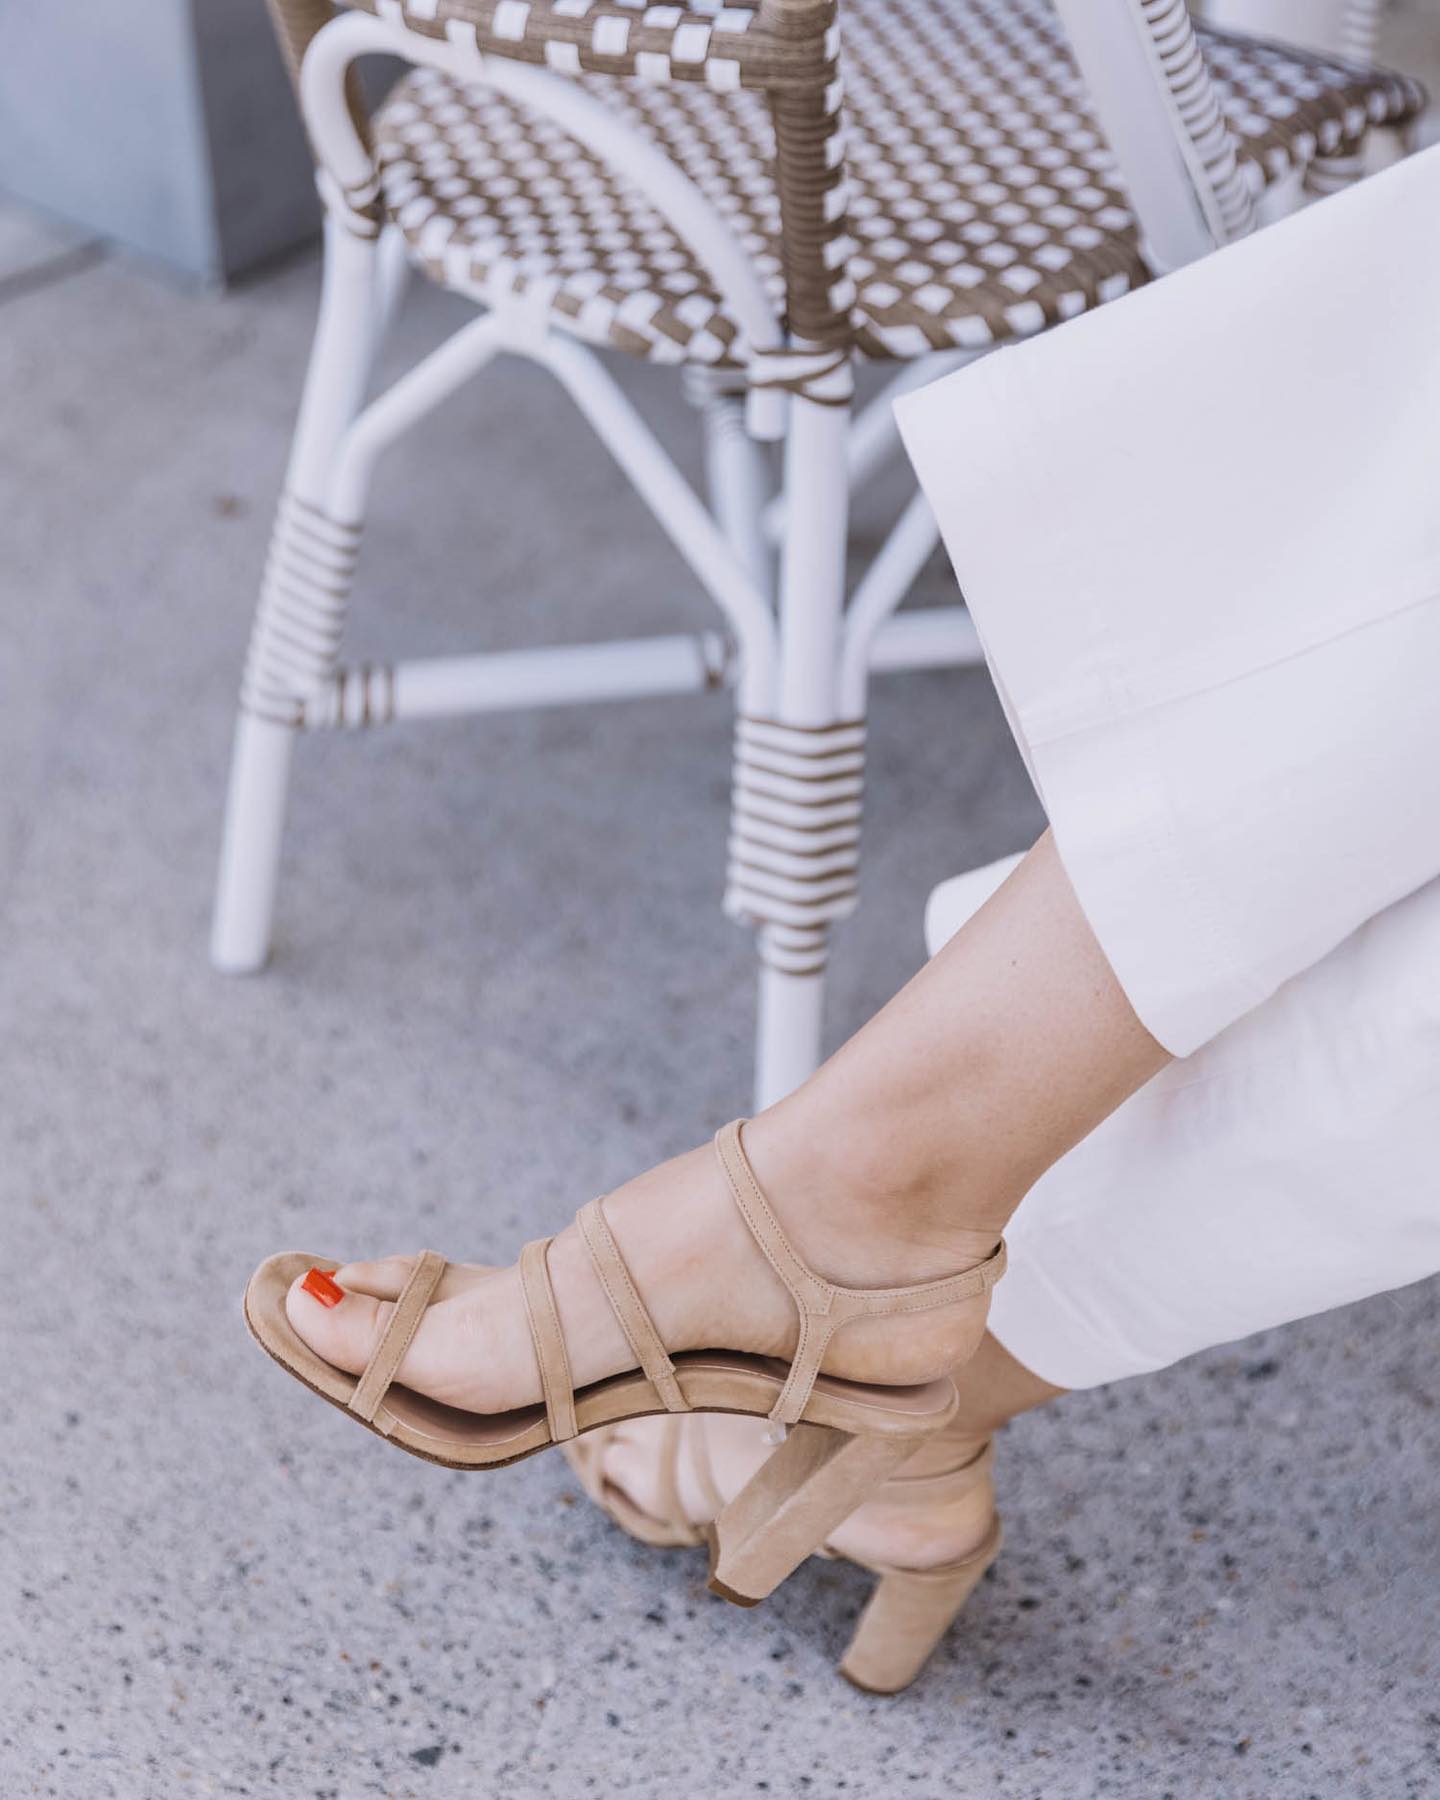 This style is such a great neutral and goes with so much. Love the strappy suede and slightly chunky heel.